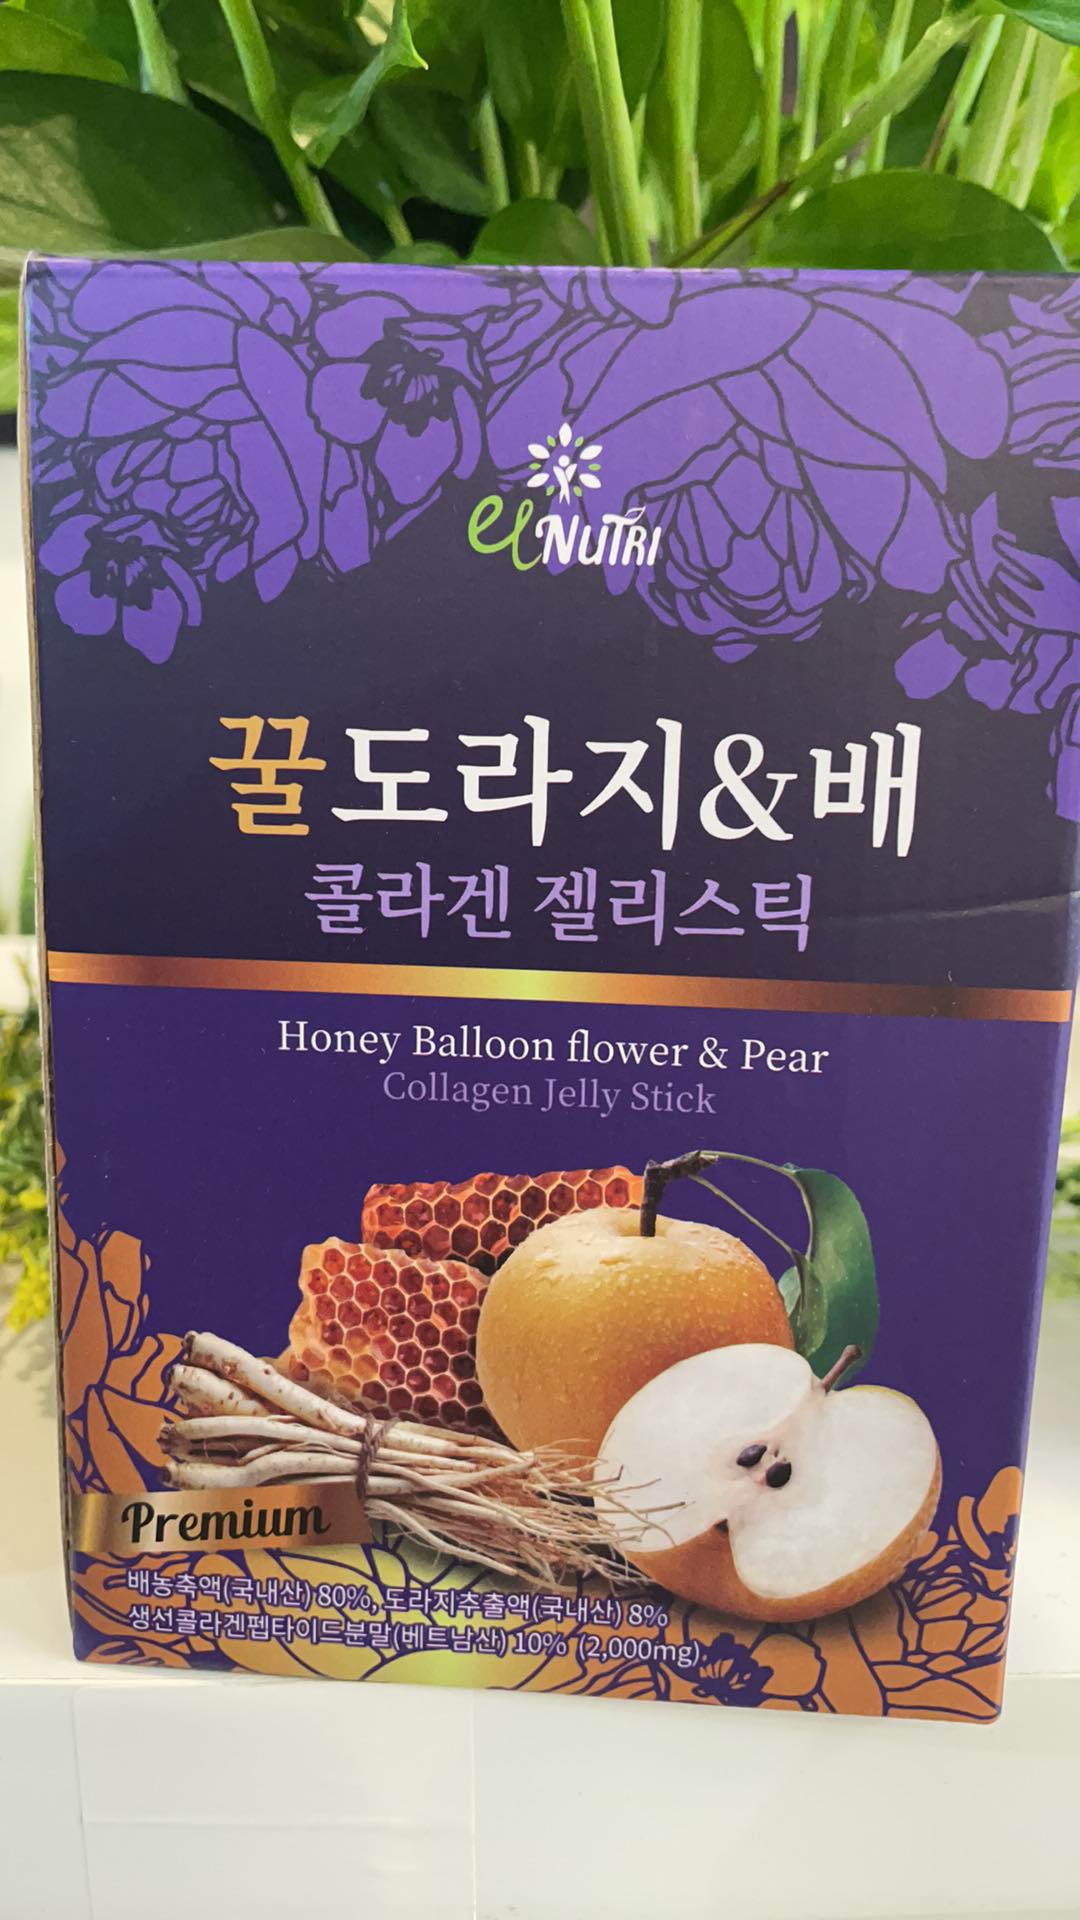 Collagen Jelly Stick (Honey Balloon Flower and Pear)